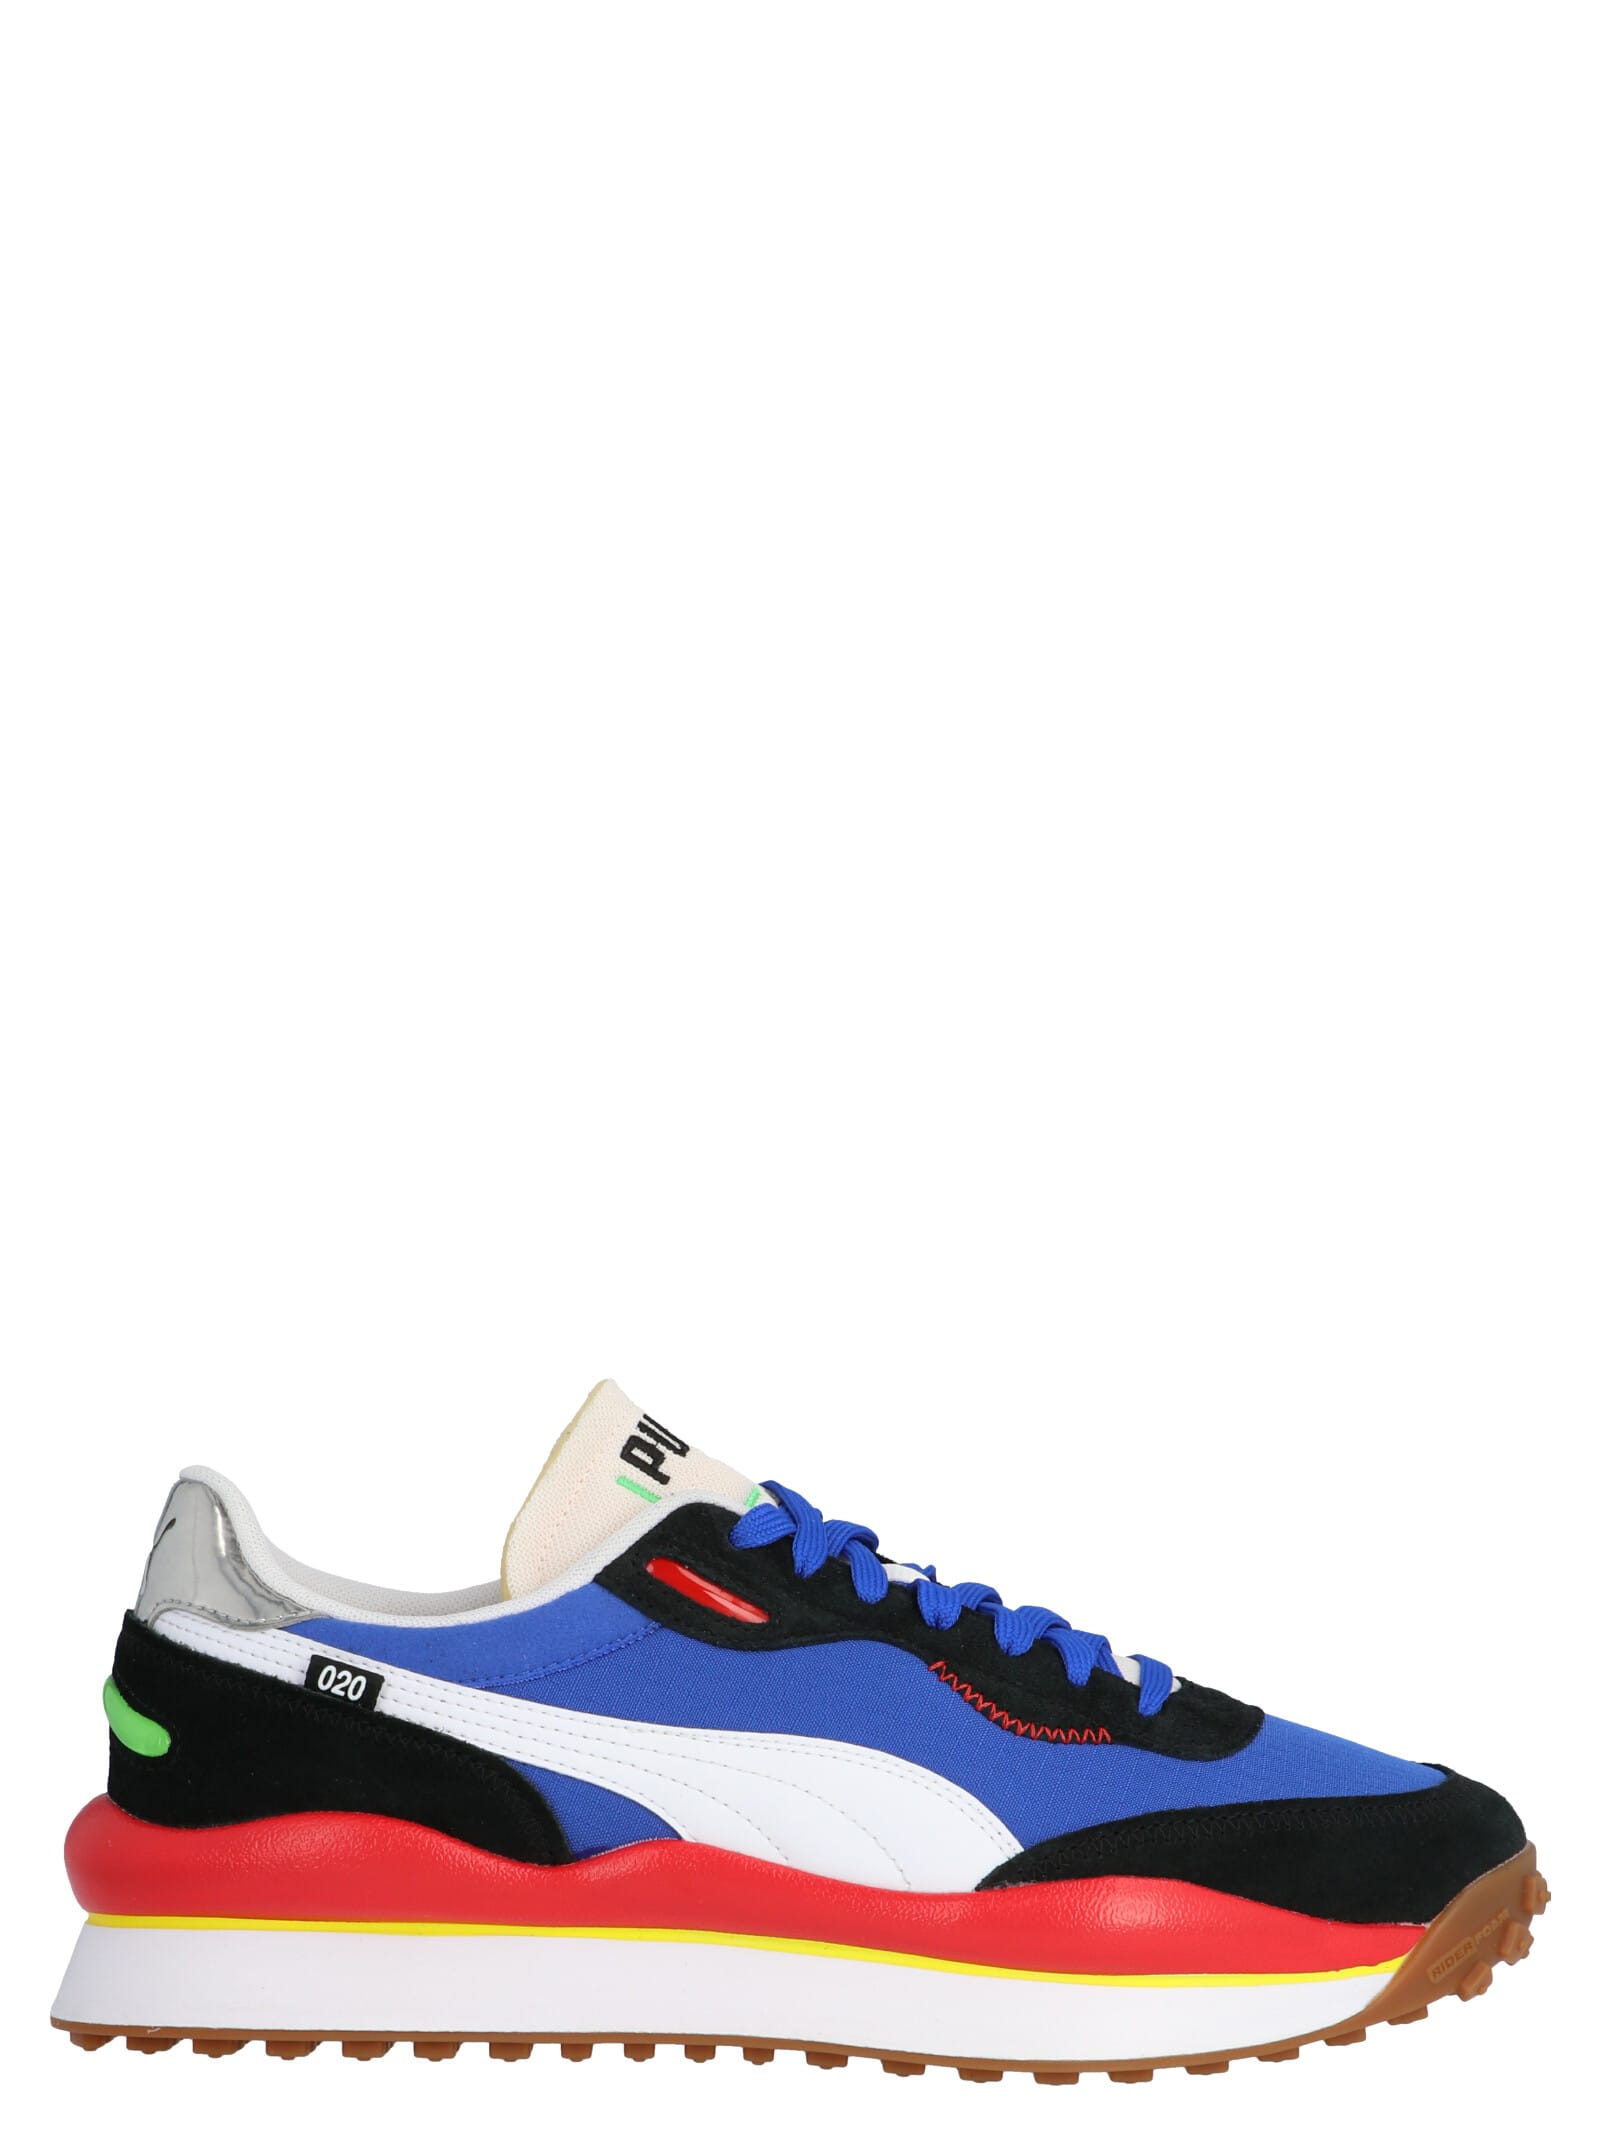 PUMA STYLE RIDERS SHOES,11293036